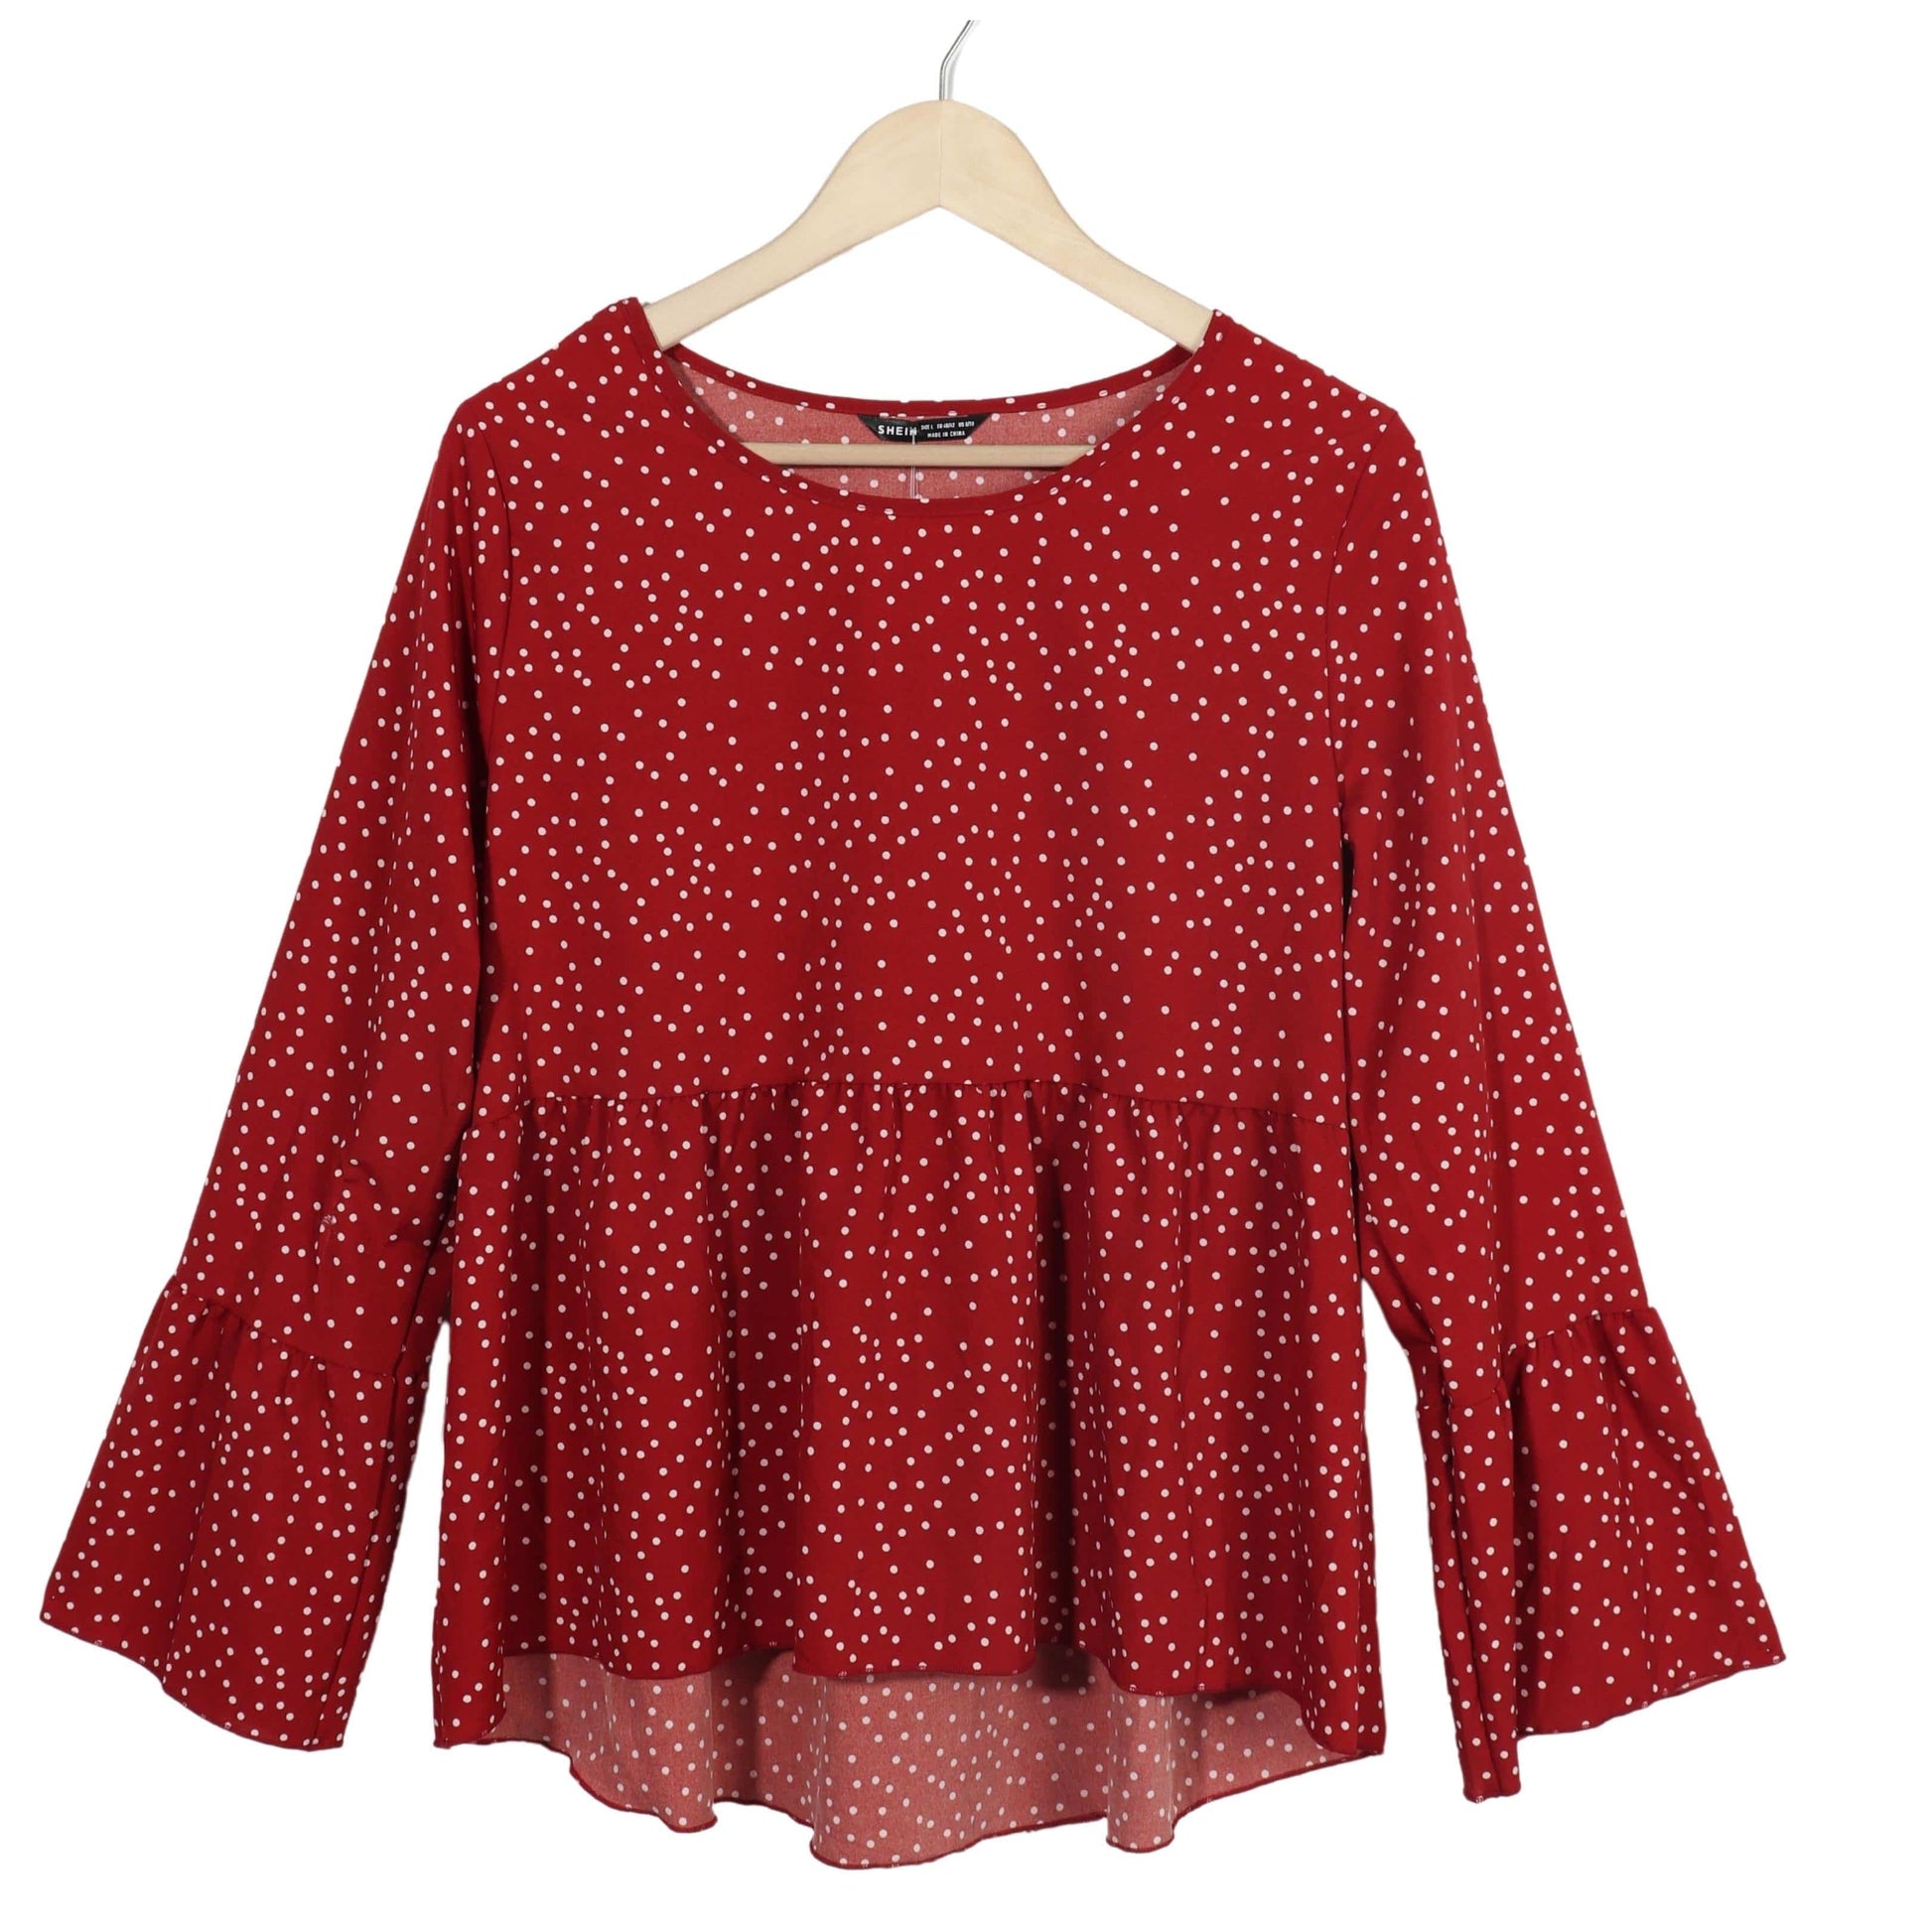 SHEIN Womens Tops L / Red SHEIN - Dotted Long Sleeve Blouse